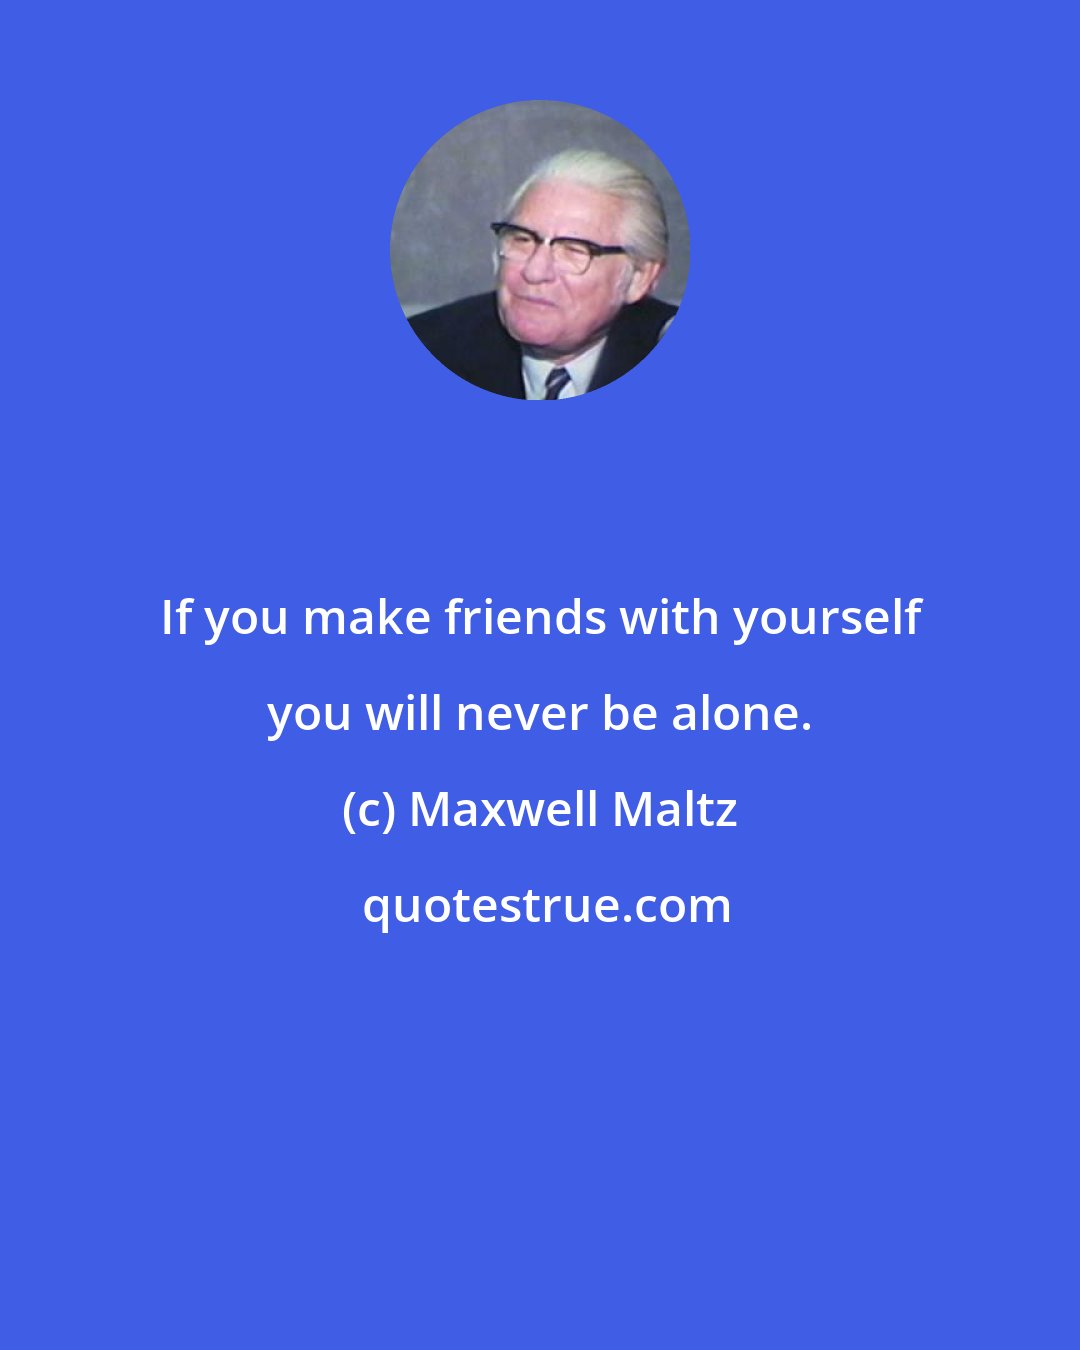 Maxwell Maltz: If you make friends with yourself you will never be alone.